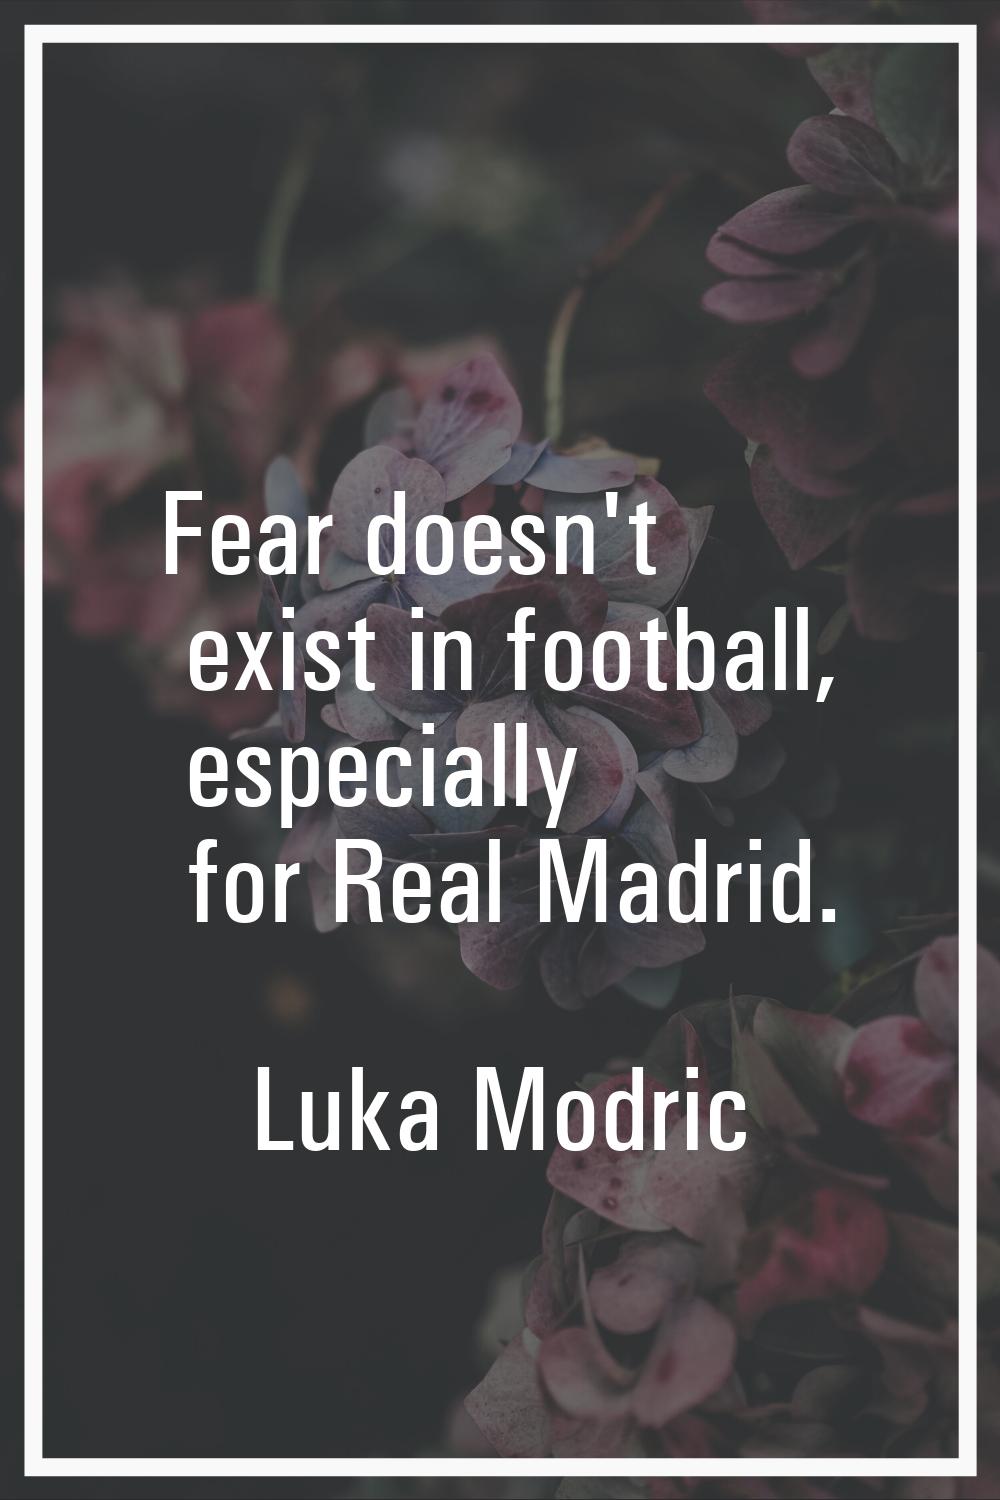 Fear doesn't exist in football, especially for Real Madrid.